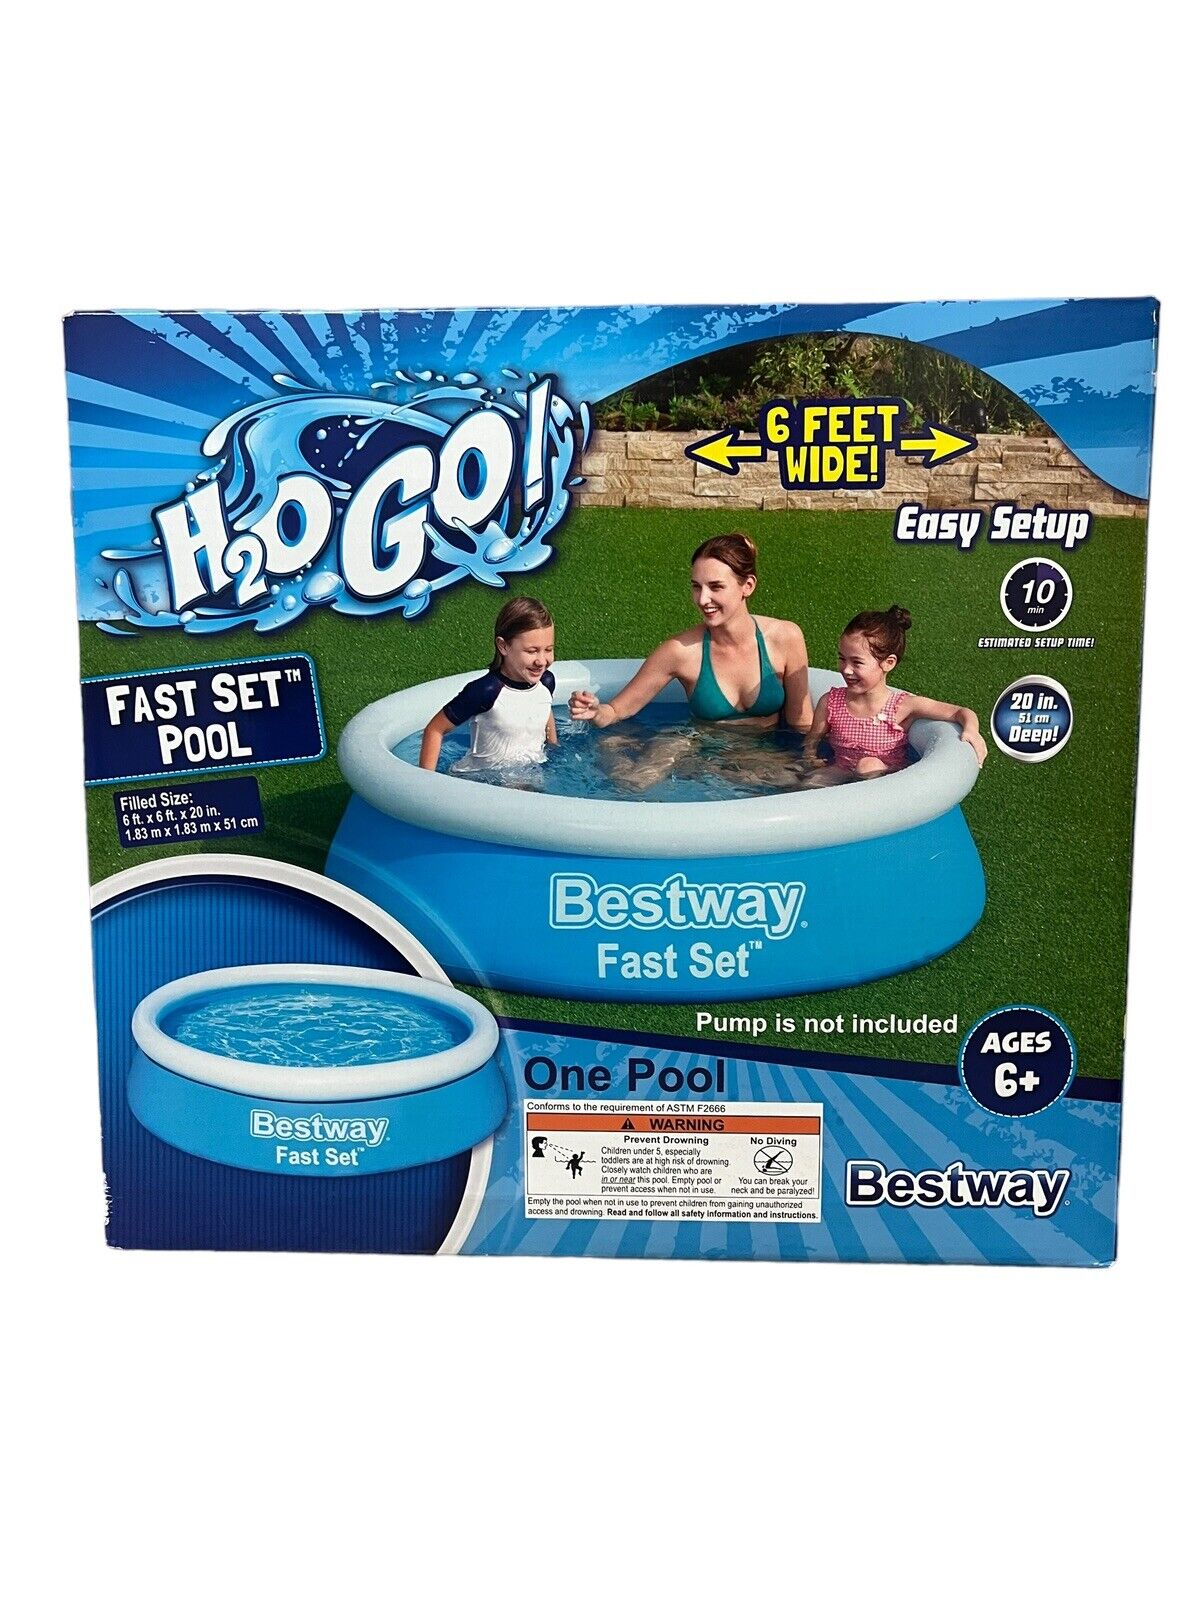 H2OGO! Fast Set 6'x20" Round Inflatable Above-Ground Pool, for Outdoor Use